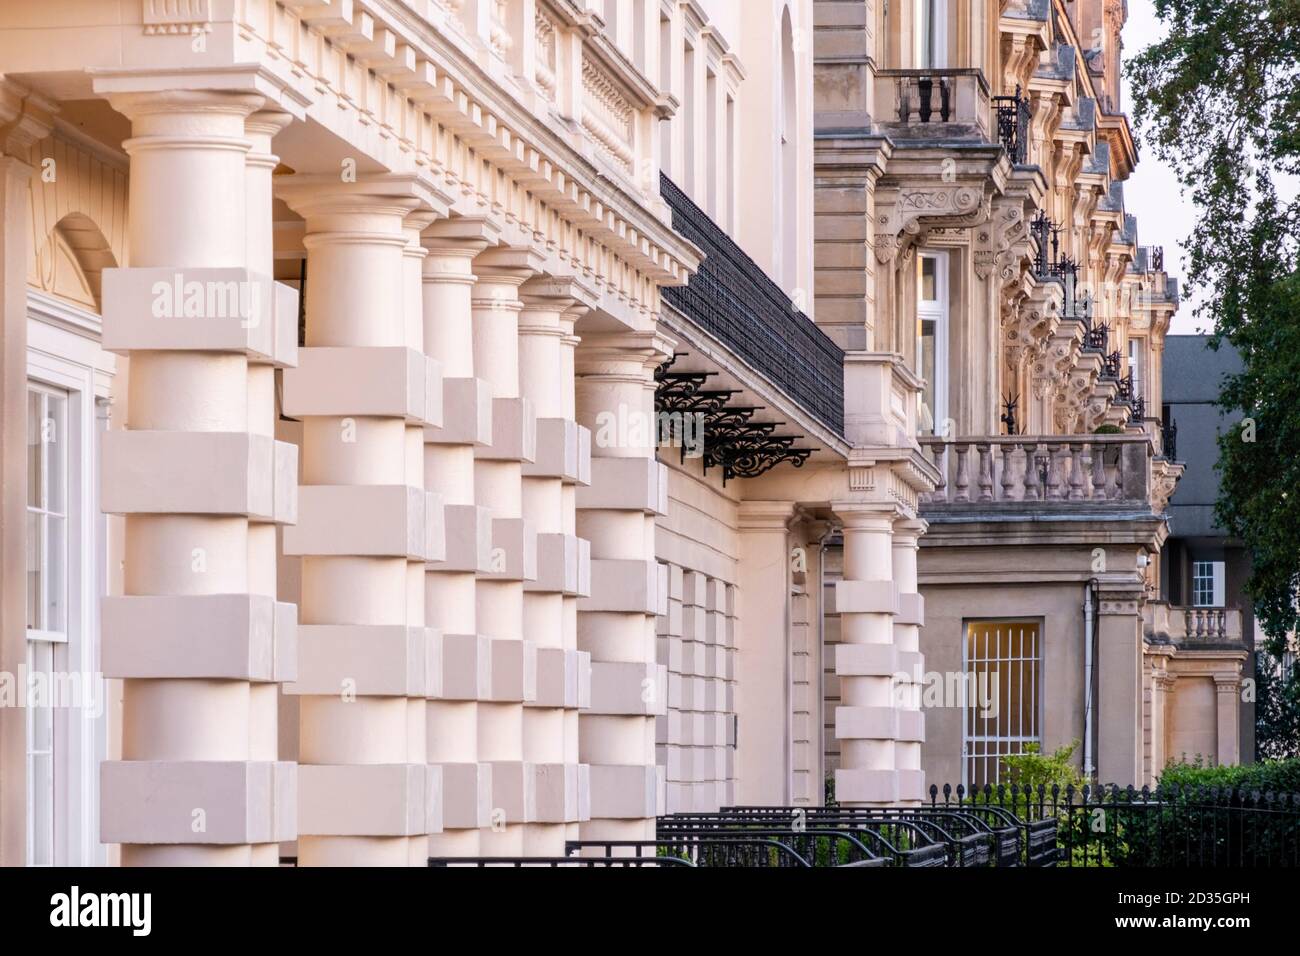 London, Camden, CambridgeTerrace: an exclusive street of luxury townhouse terraced mansions off Regent's Park, by royal architect, John Nash Stock Photo